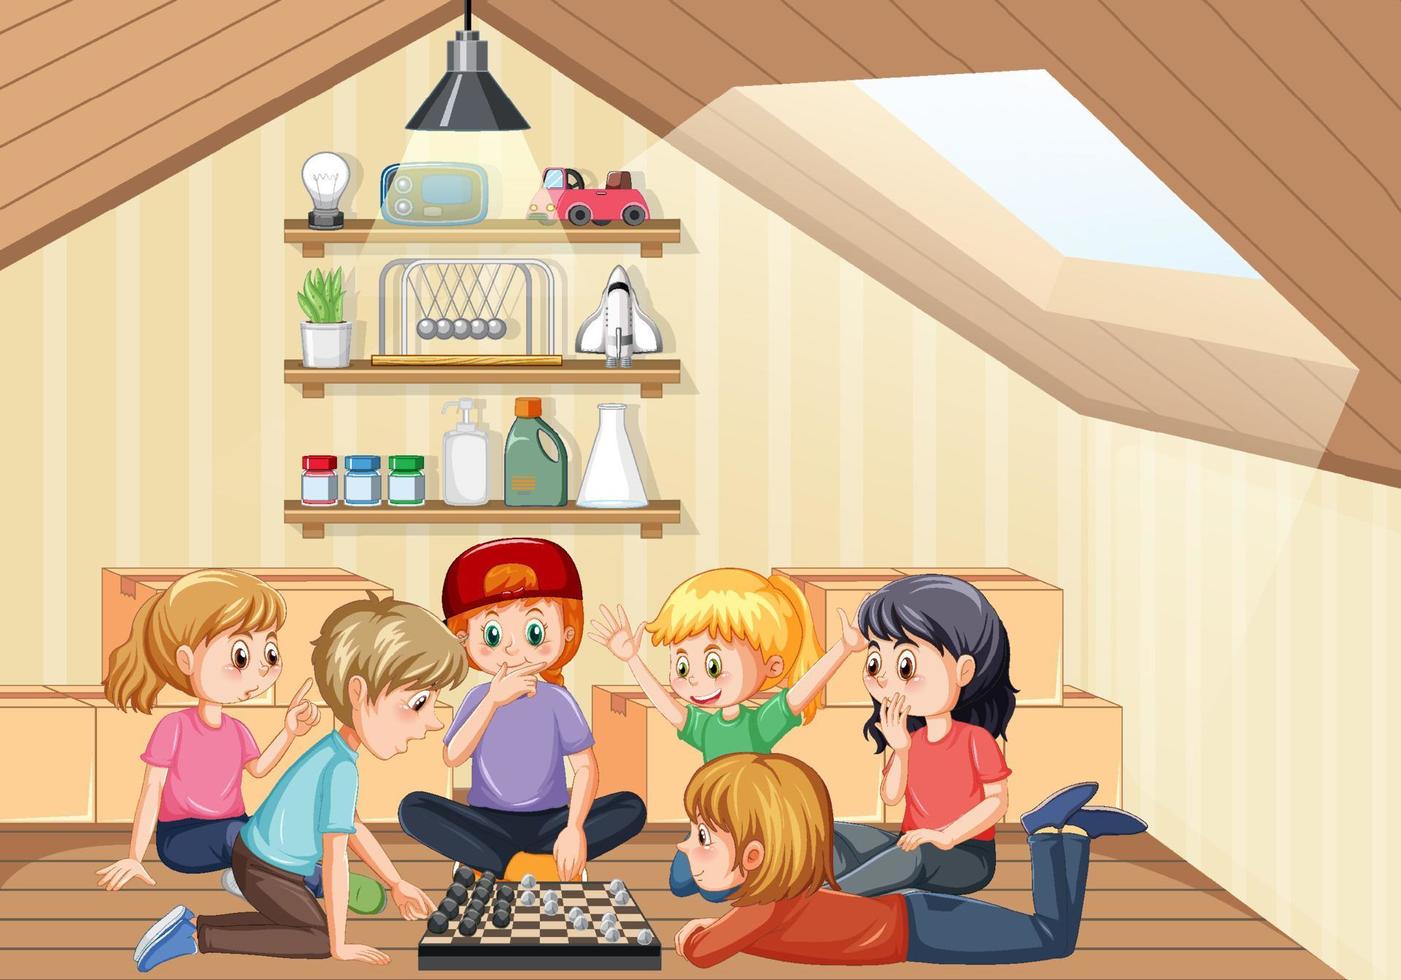 Children playing games in the room vector